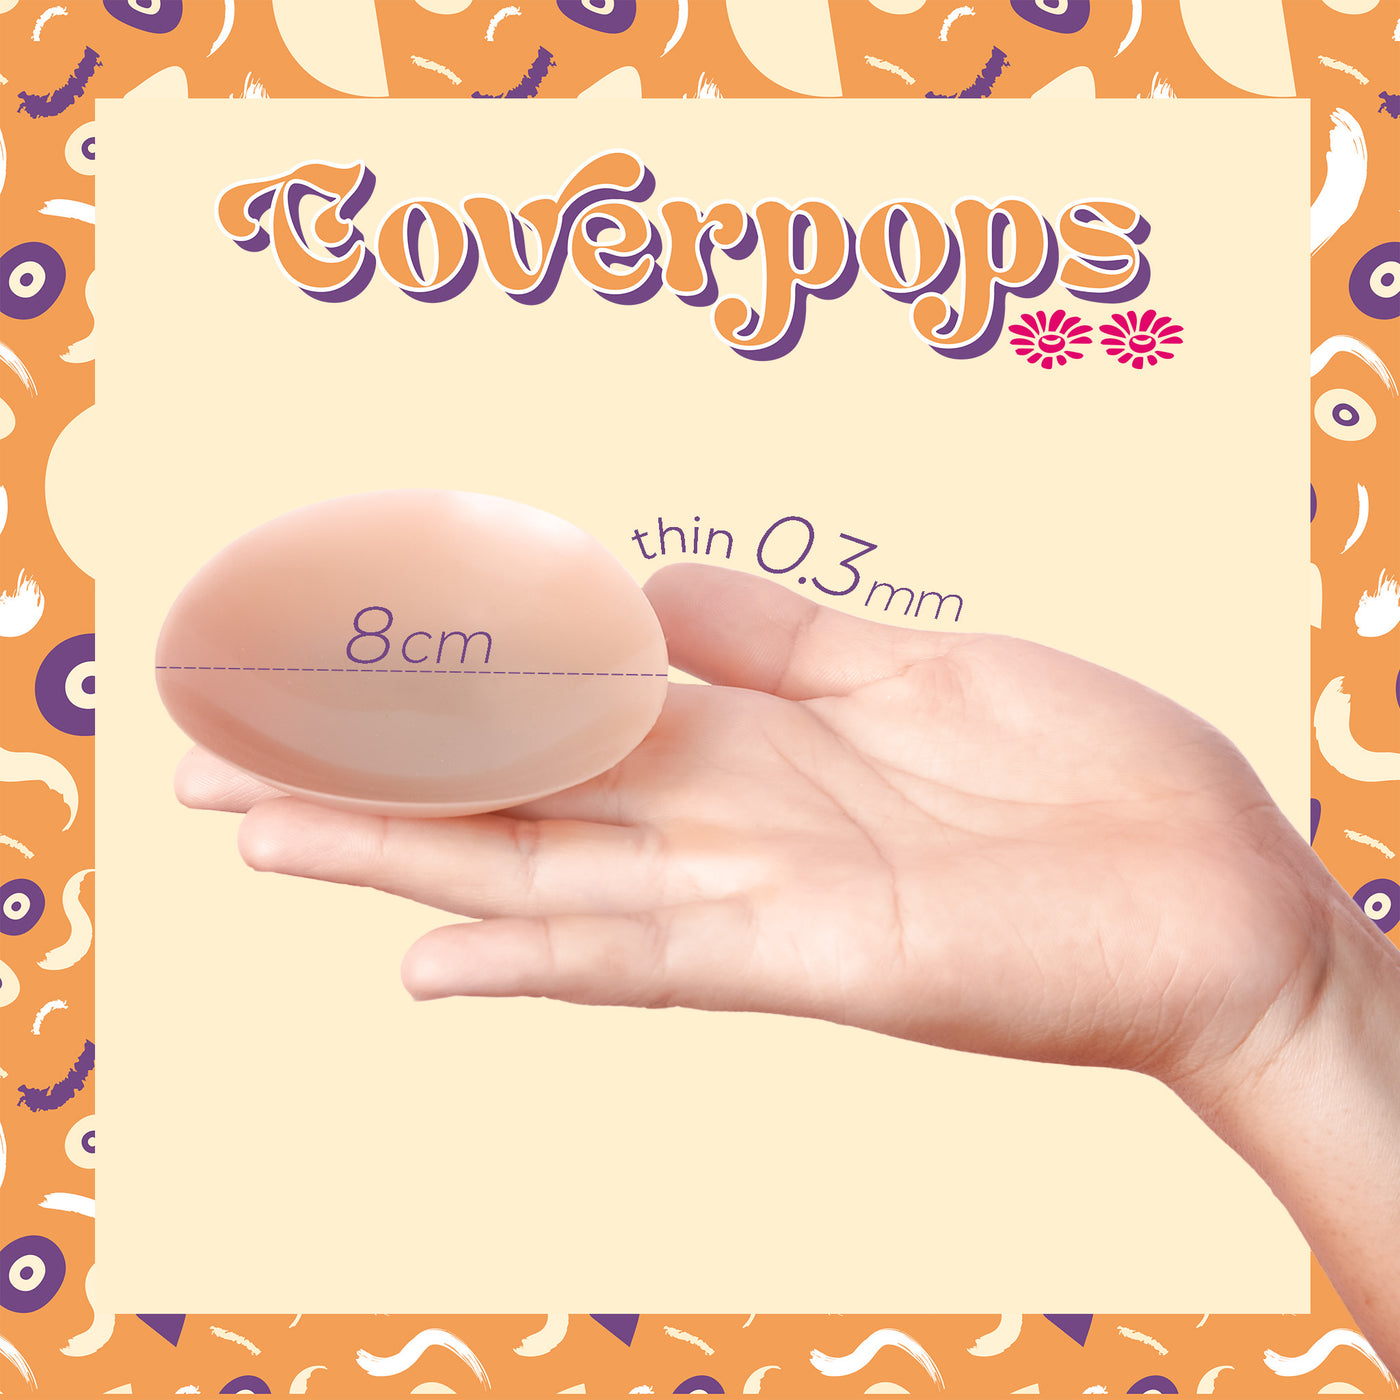 Coverpops  Non - adhesive Nipple Covers, Pasties - Reusable Up to 40